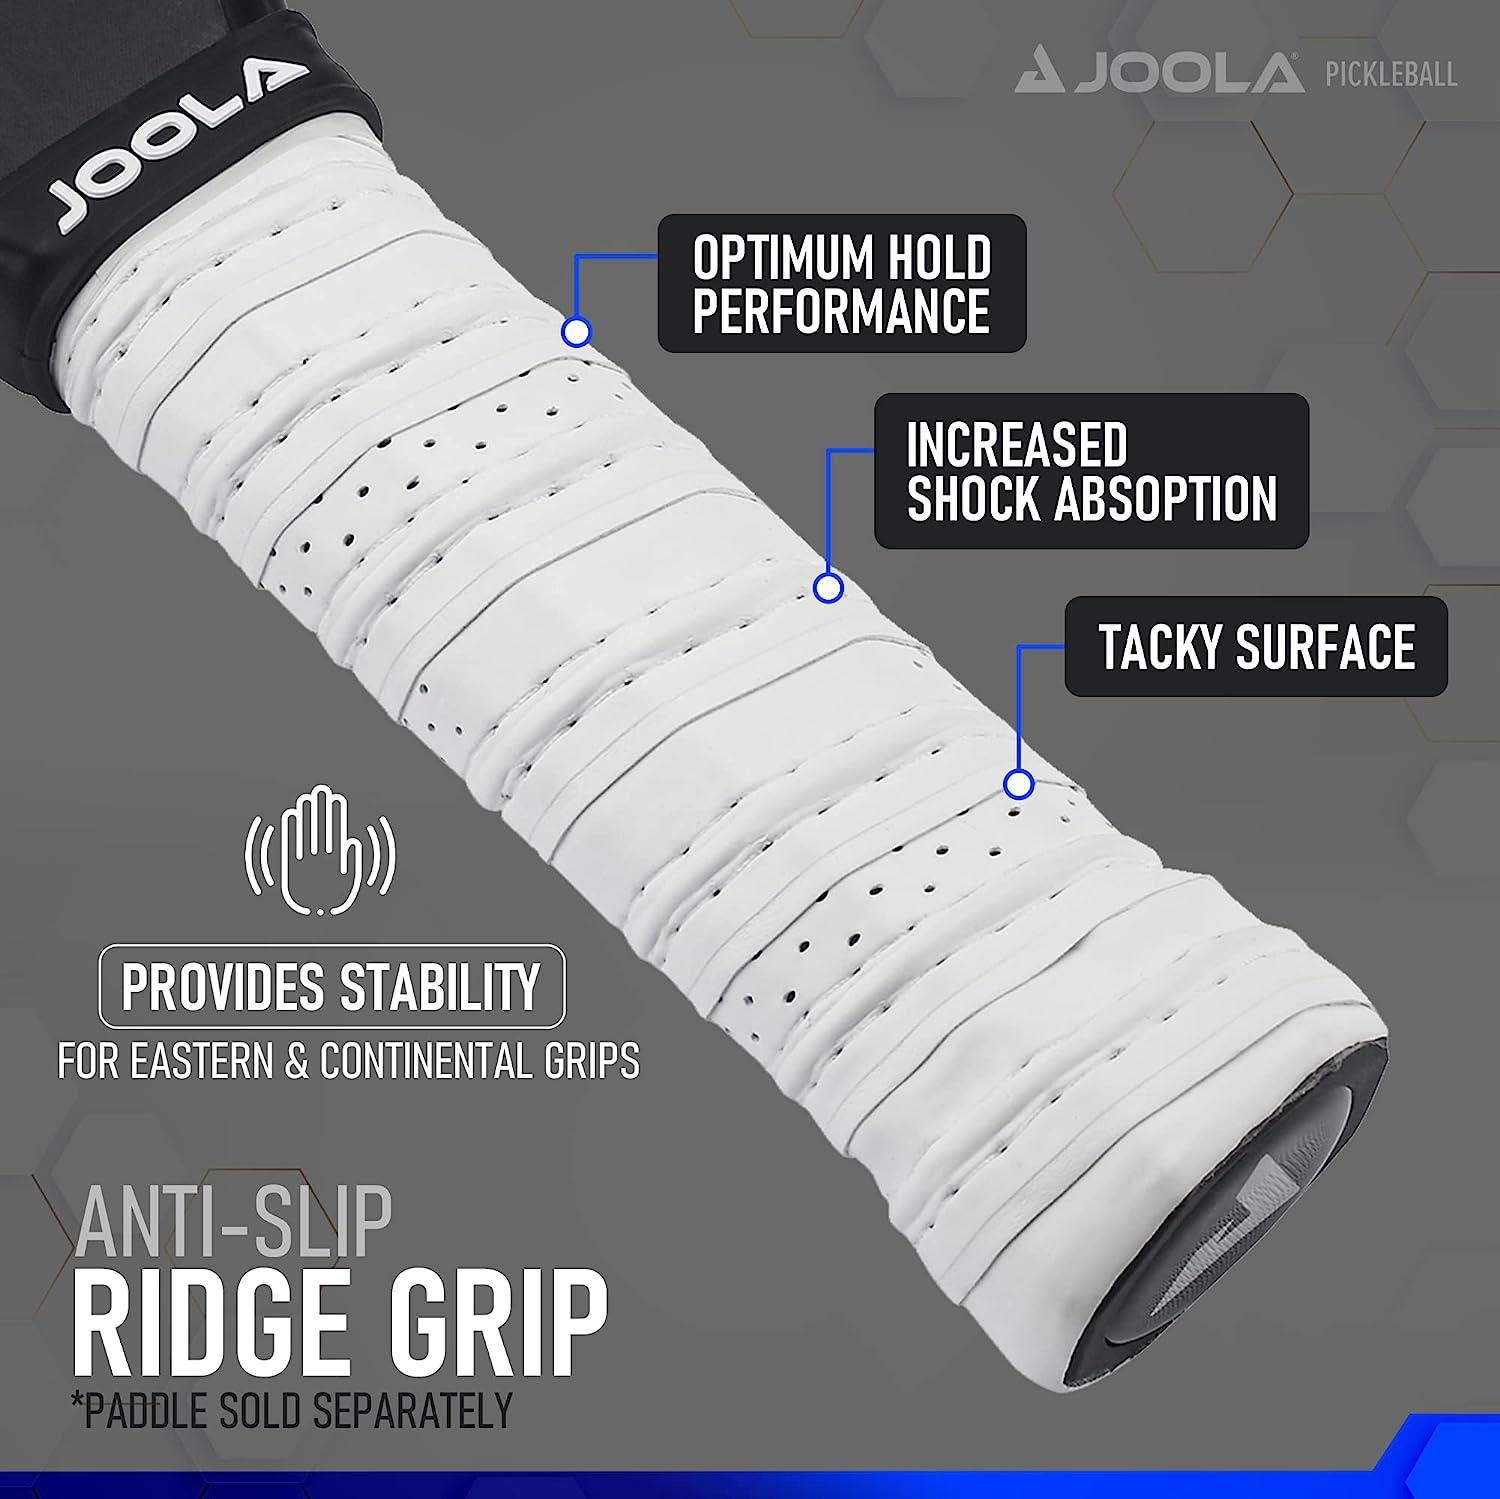 How to Wrap A Replacement Grip